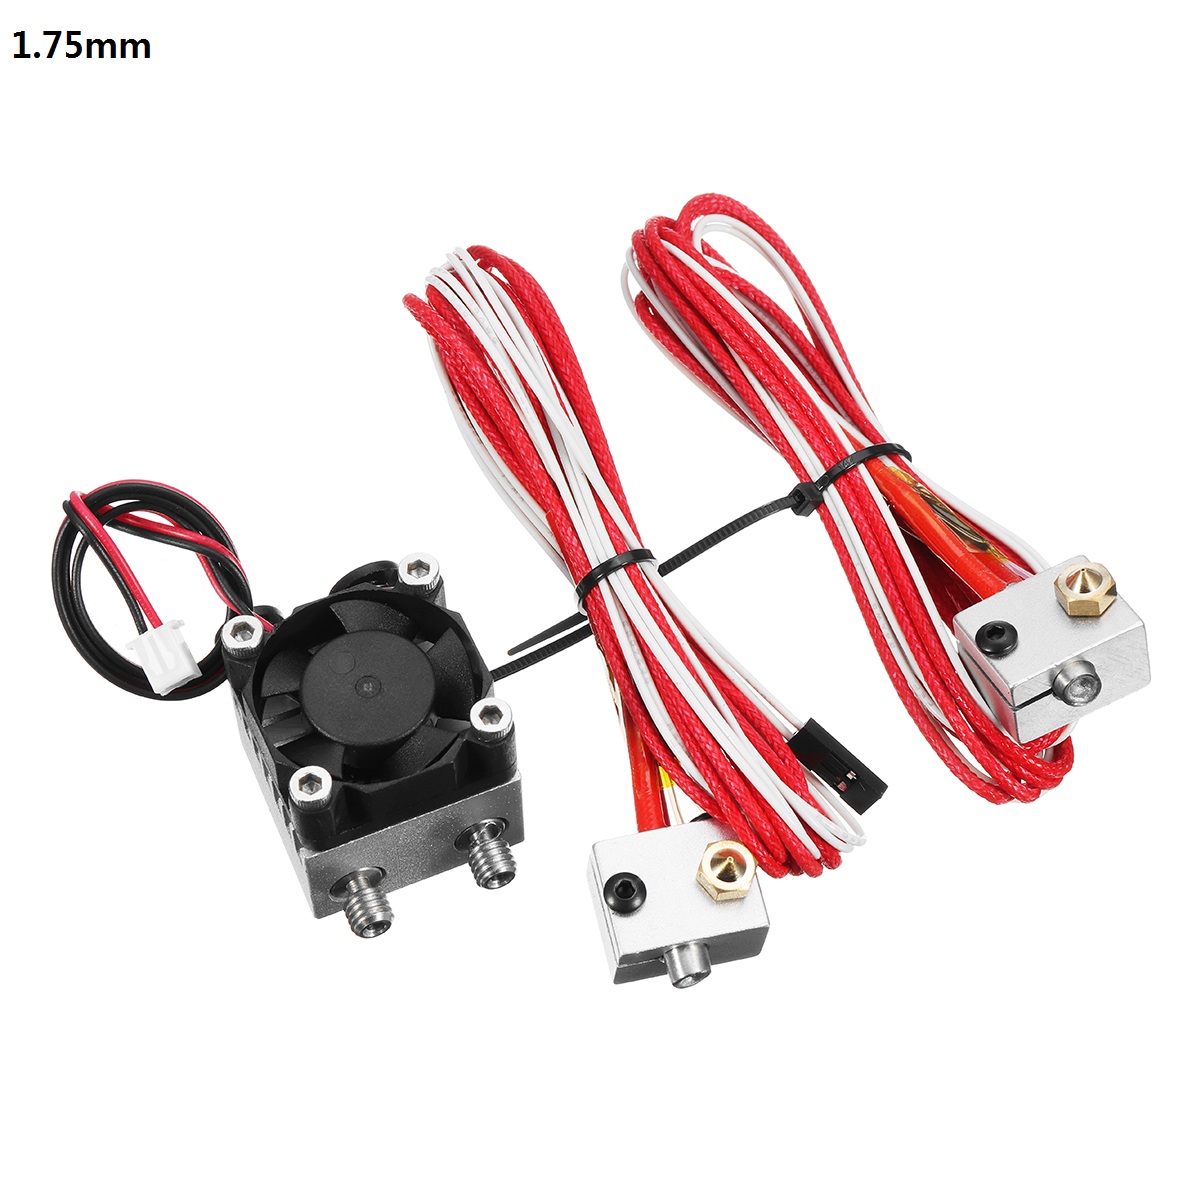 1.75mm/3.0mm Fialment 0.4mm Nozzle Upgraded Dual Head Extruder Kit for 3D Printer 19